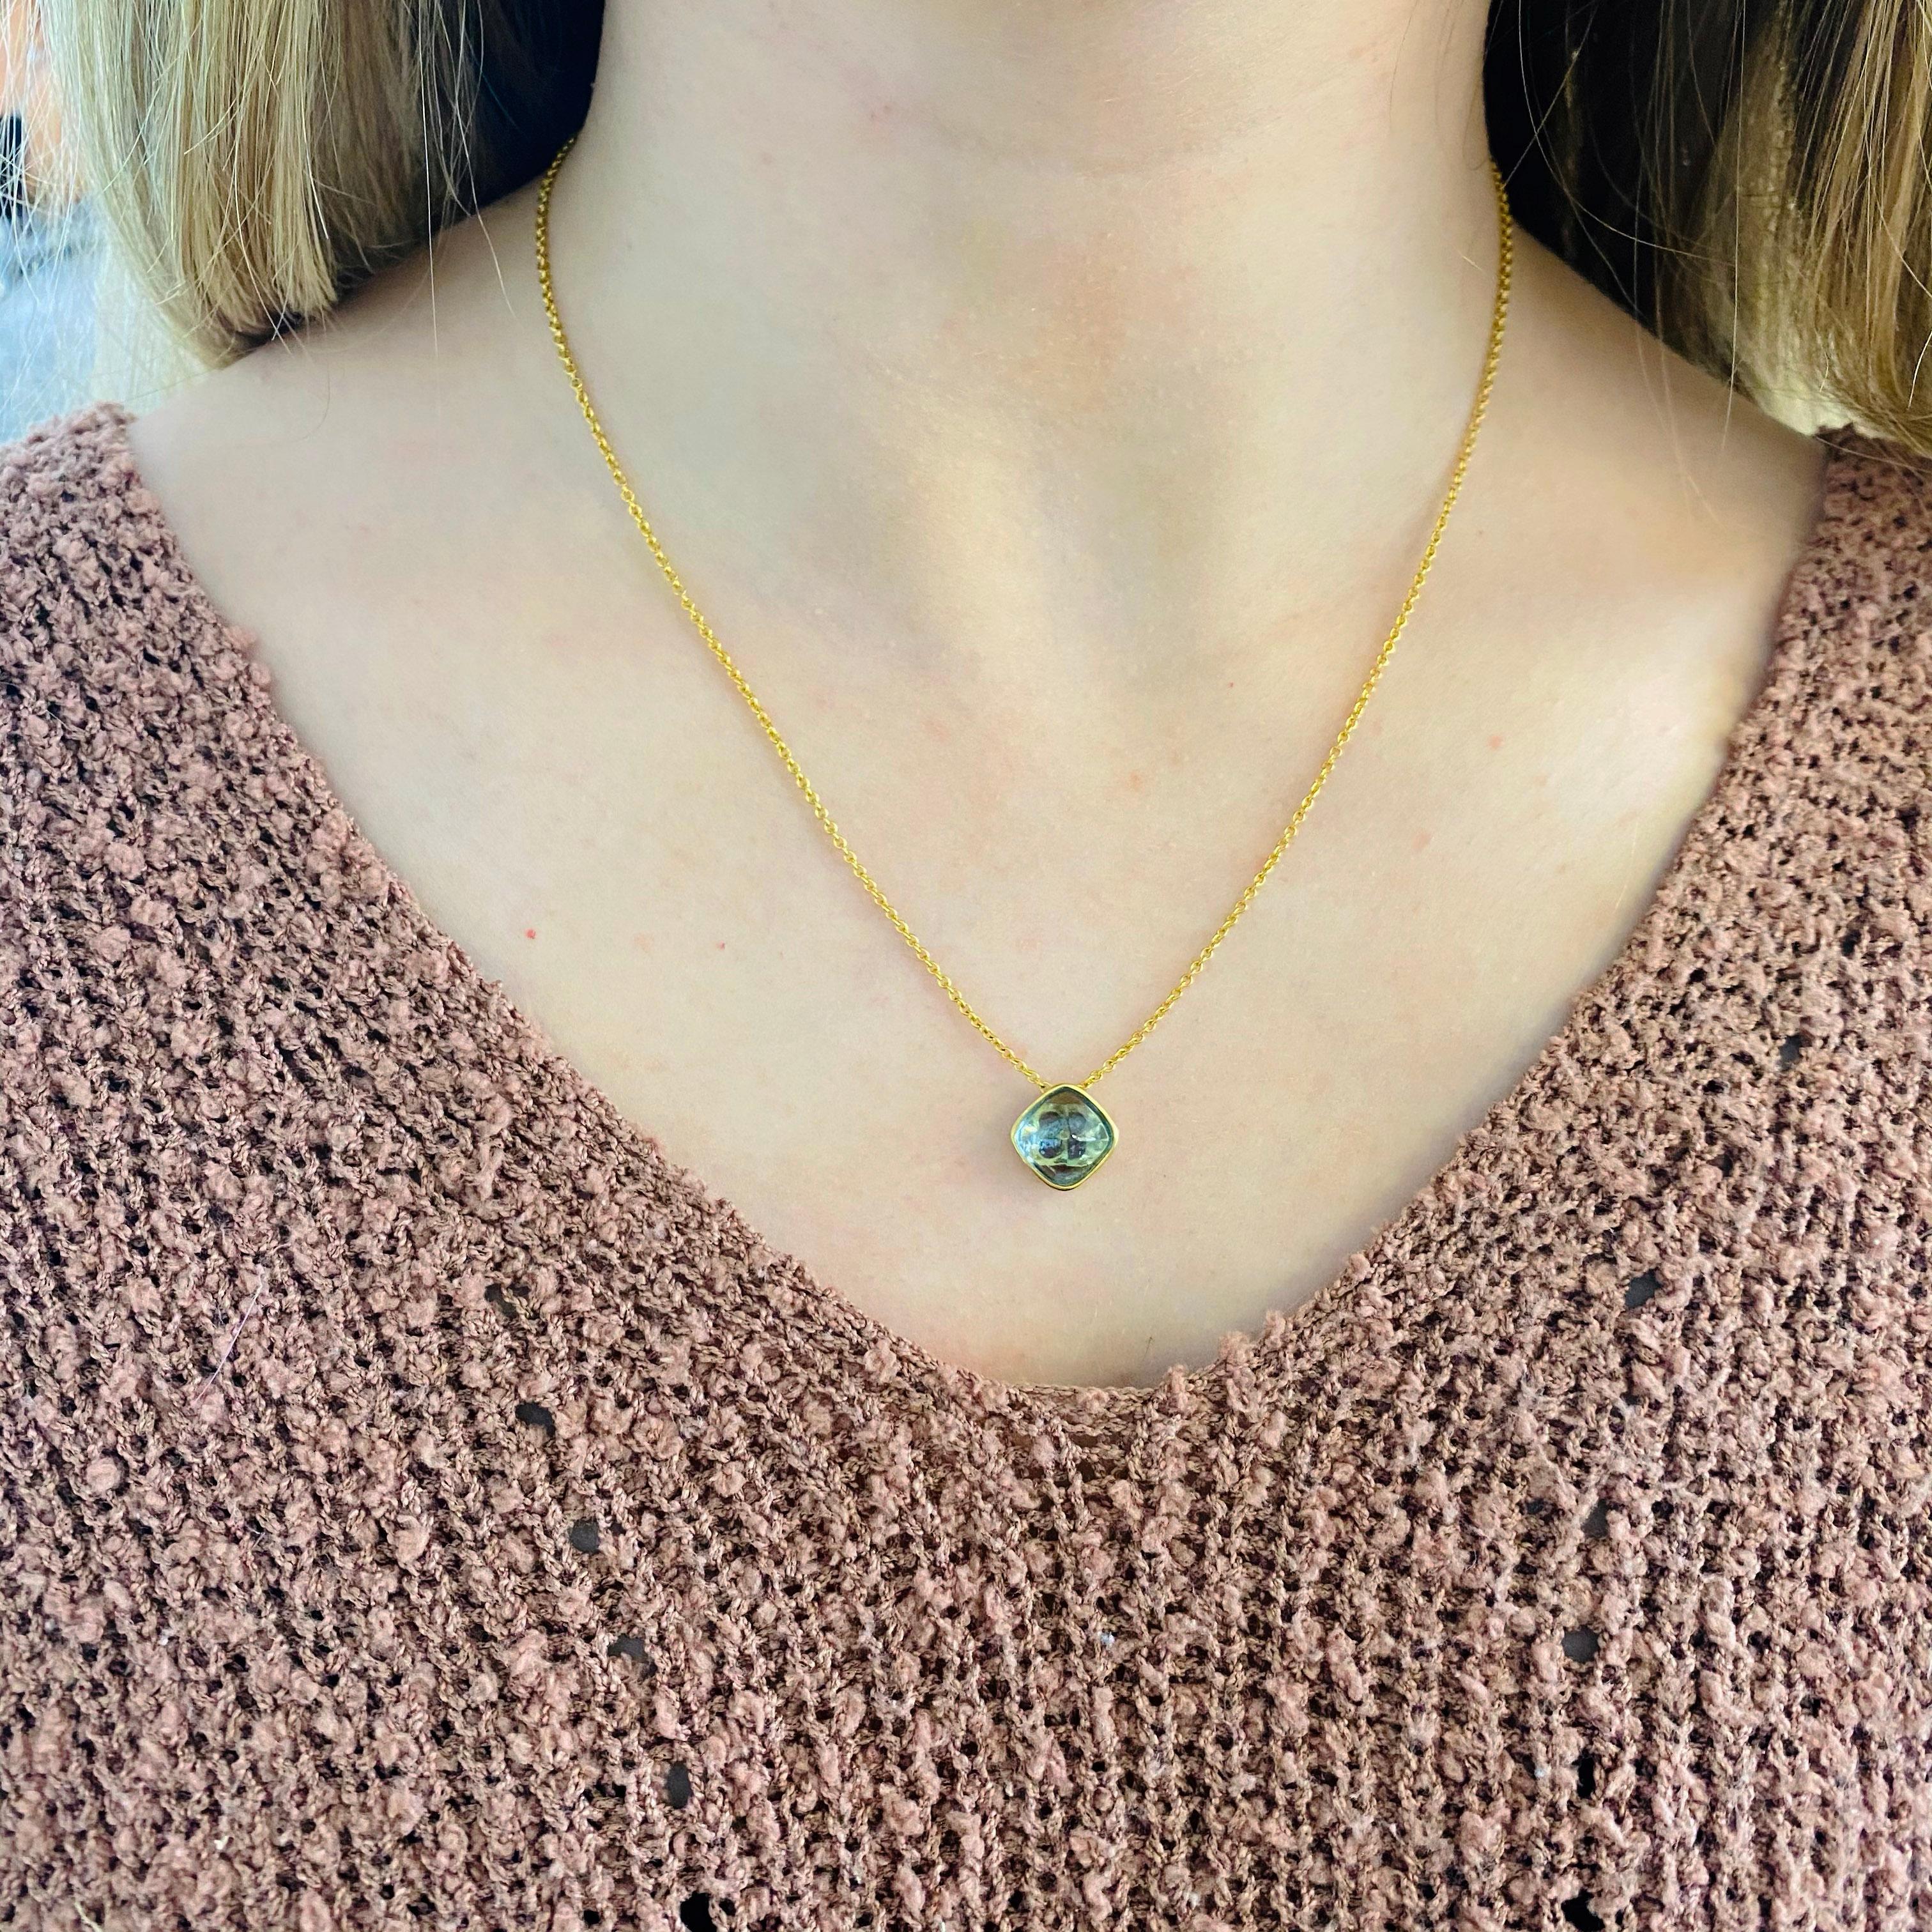 This custom made genuine natural aquamarine pendant is a one-of-a-kind!  The beautiful bullet bombe cabachon aquamarine pendant is so unique and beautiful.  if you want your eyes to pop the color of this gemstone aquamarine looks fabulous with blue,